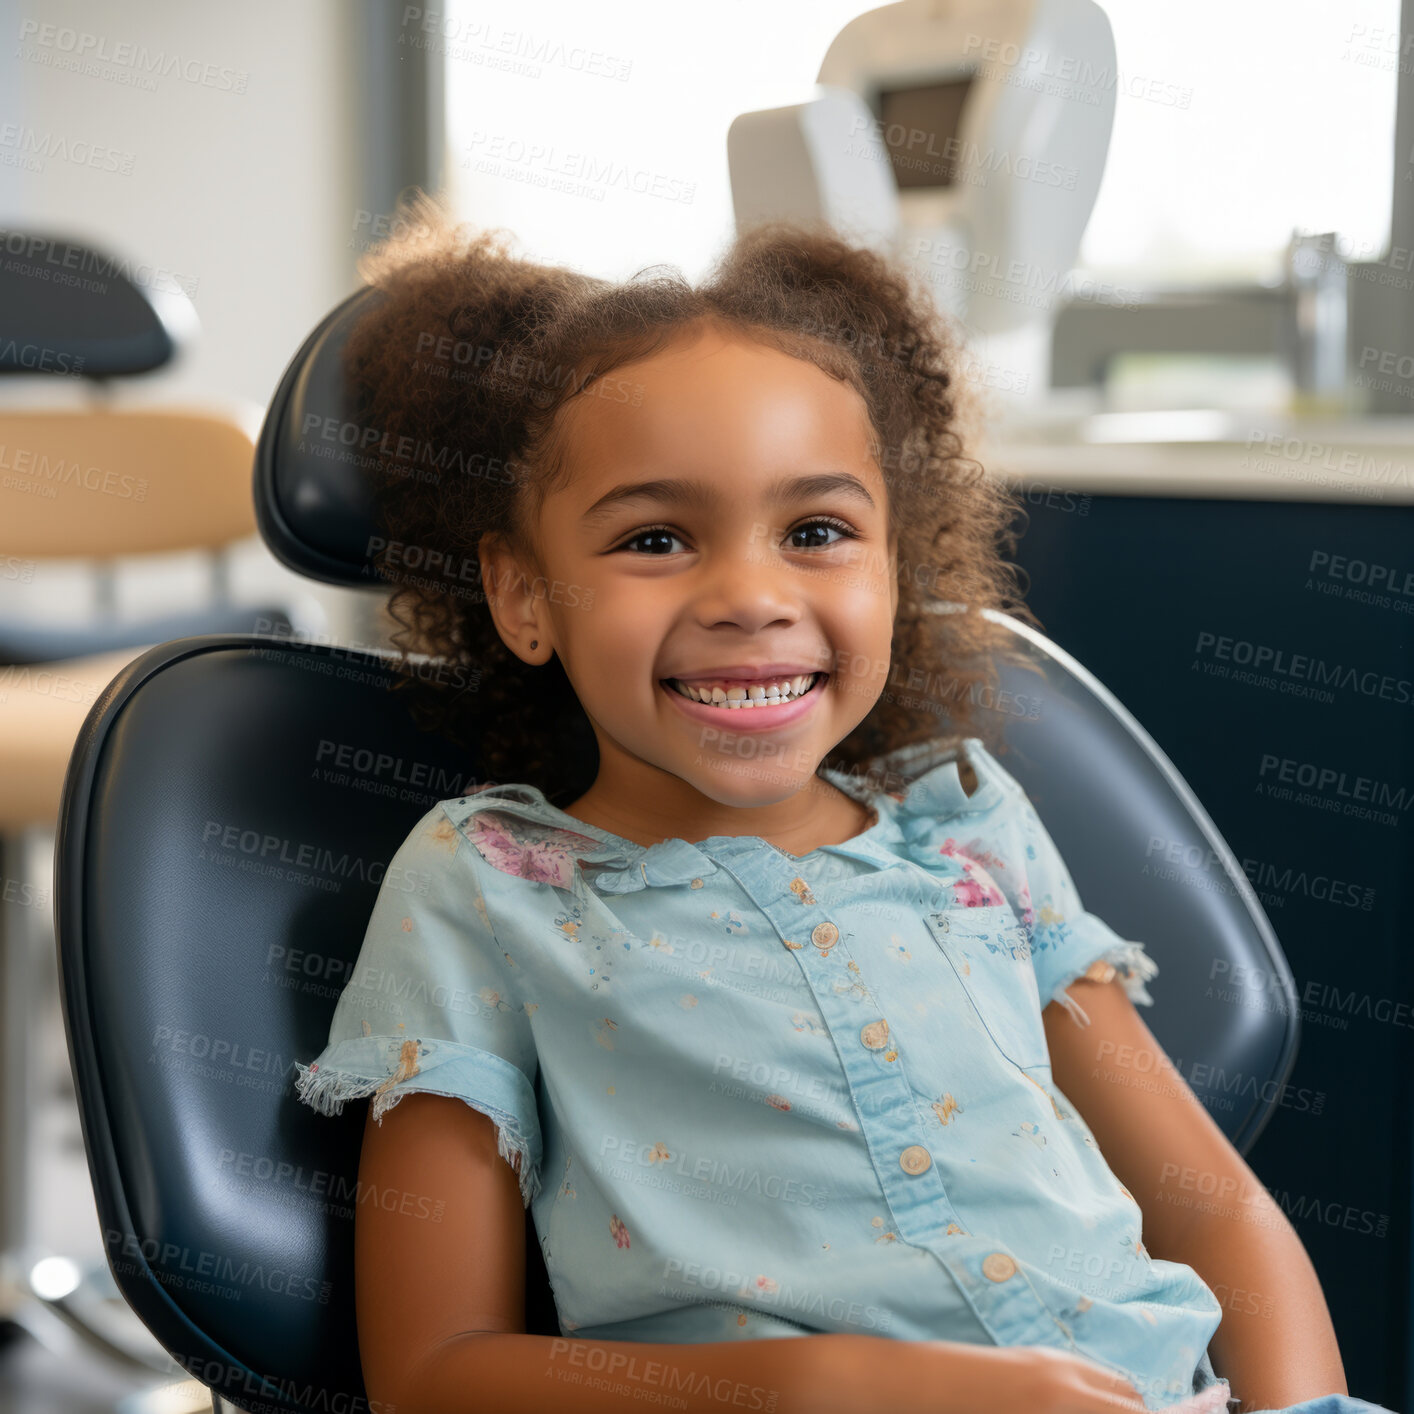 Buy stock photo Child at the dentist office. Happy school aged child sitting on dentist chair. Healthcare concept